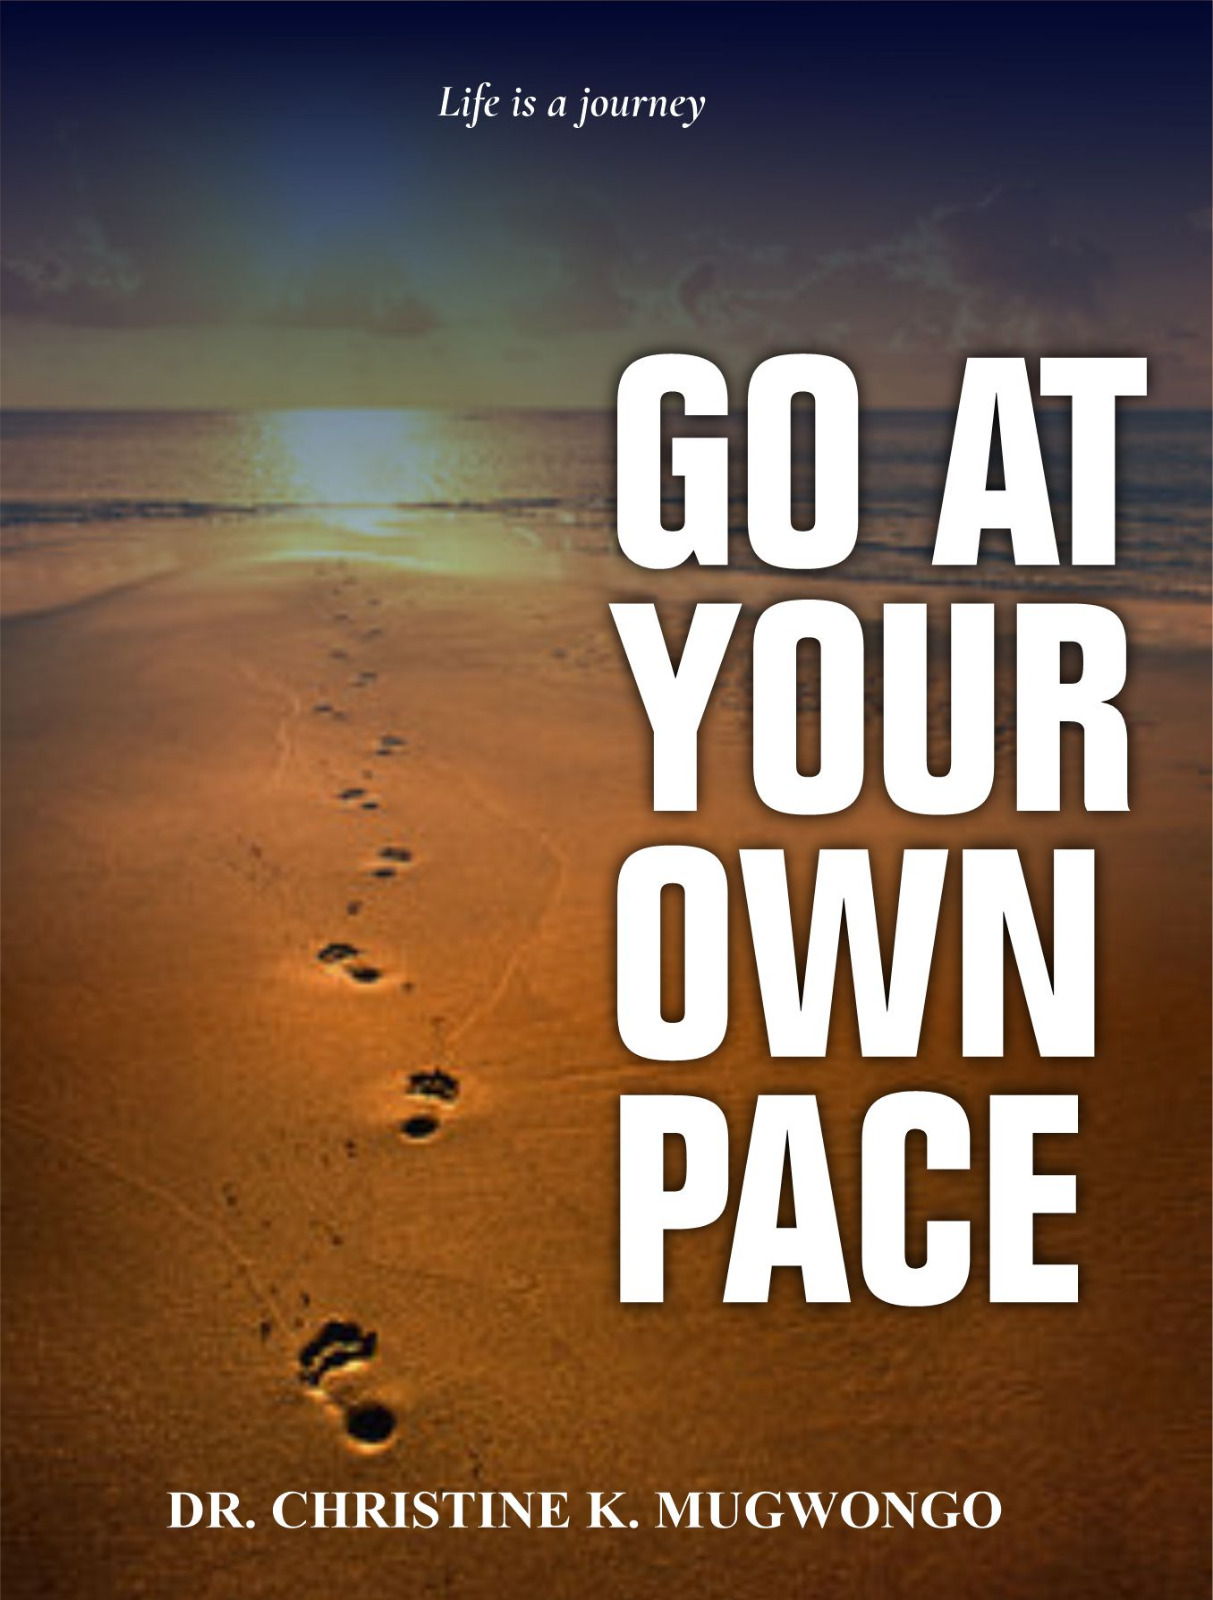 It's your journey, live it at your own pace.